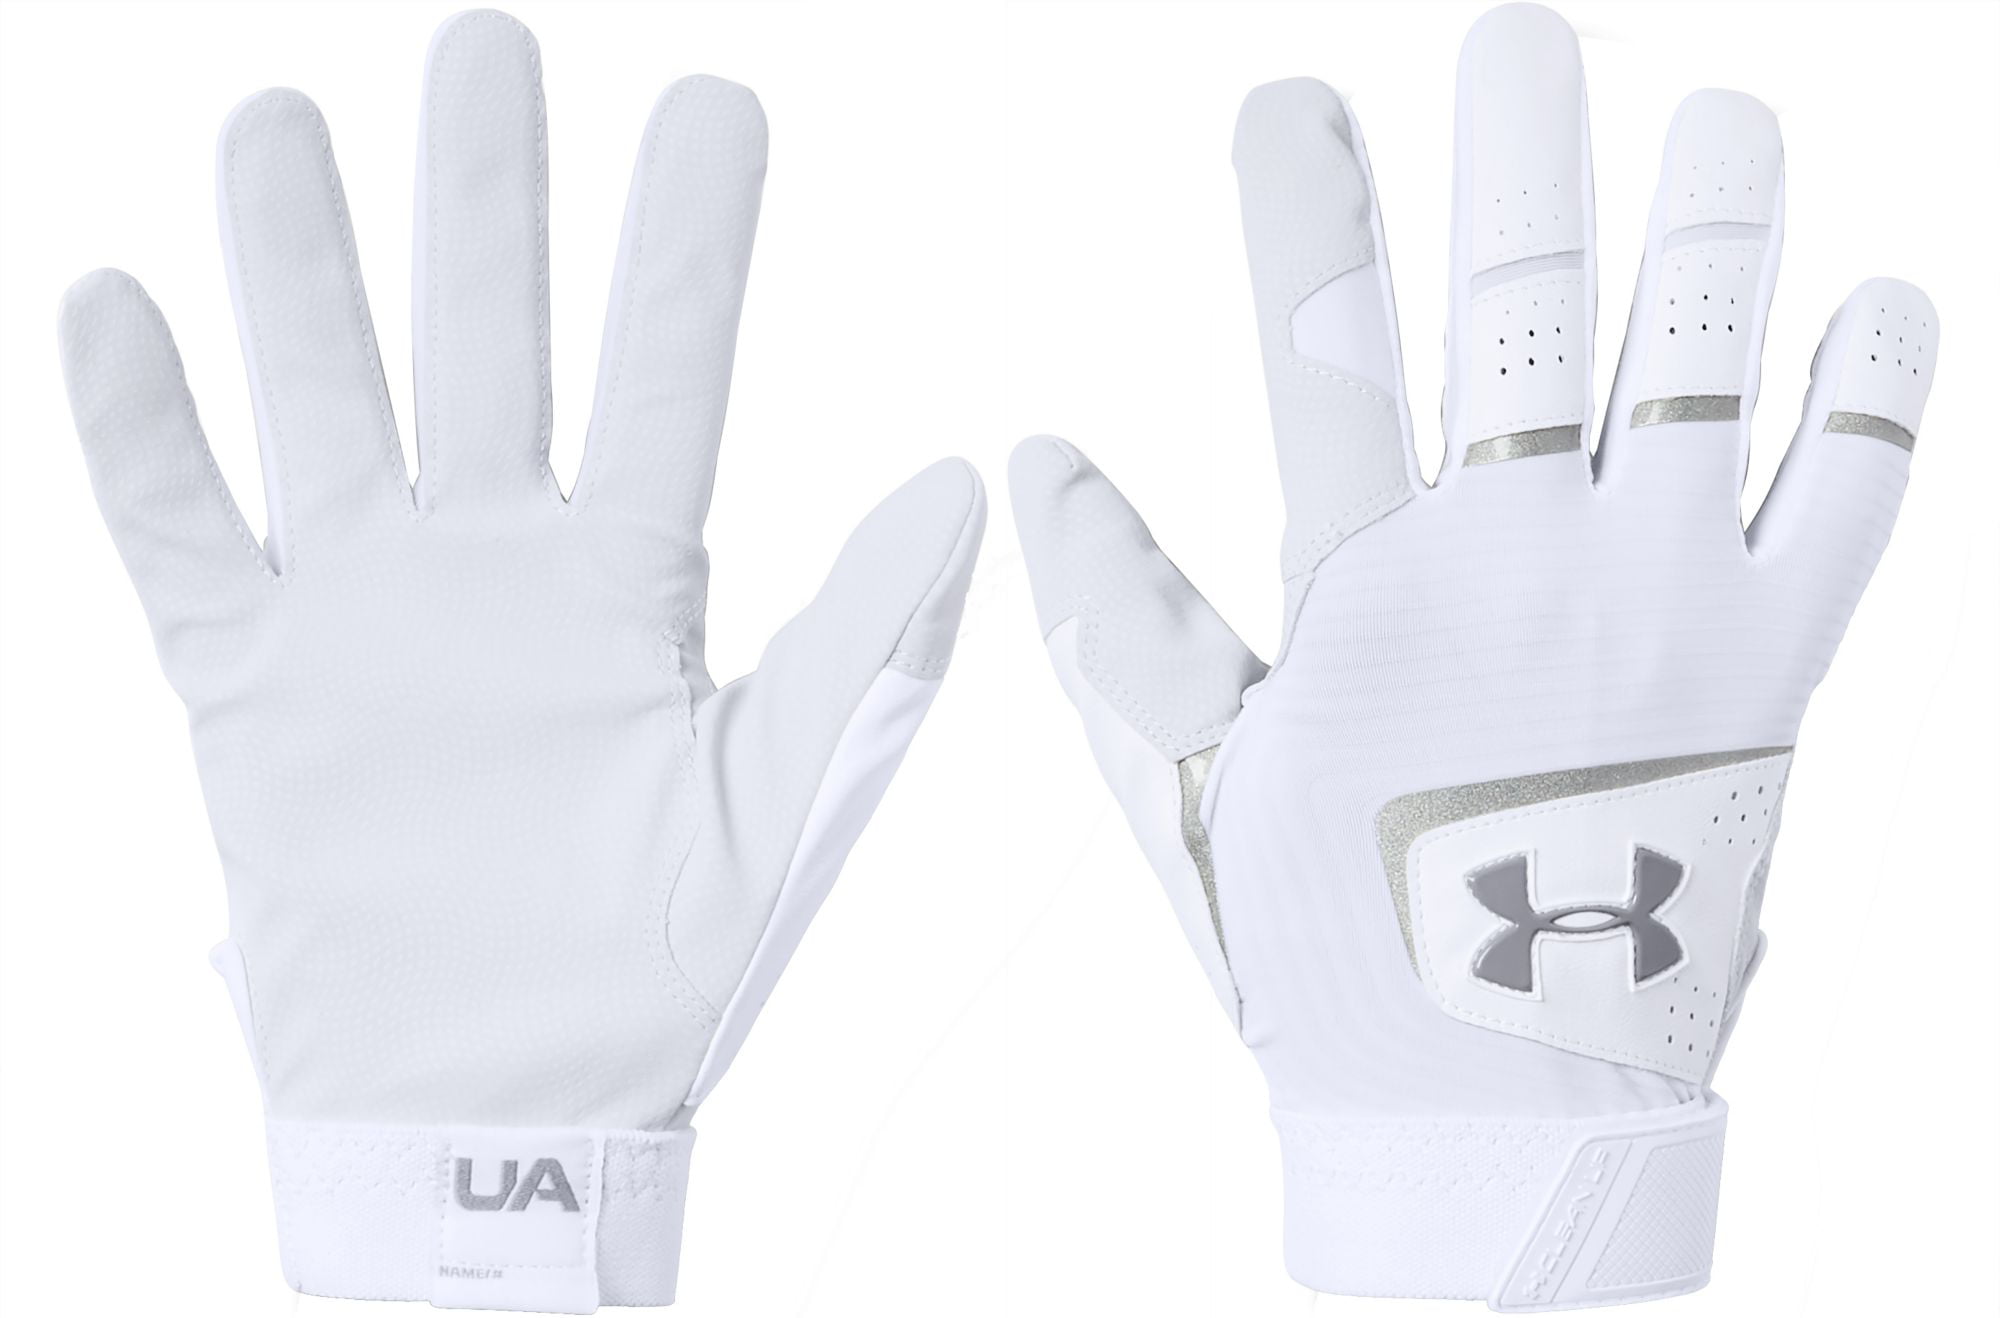 OR Under Armour Youth Clean Up Batting Glove S 